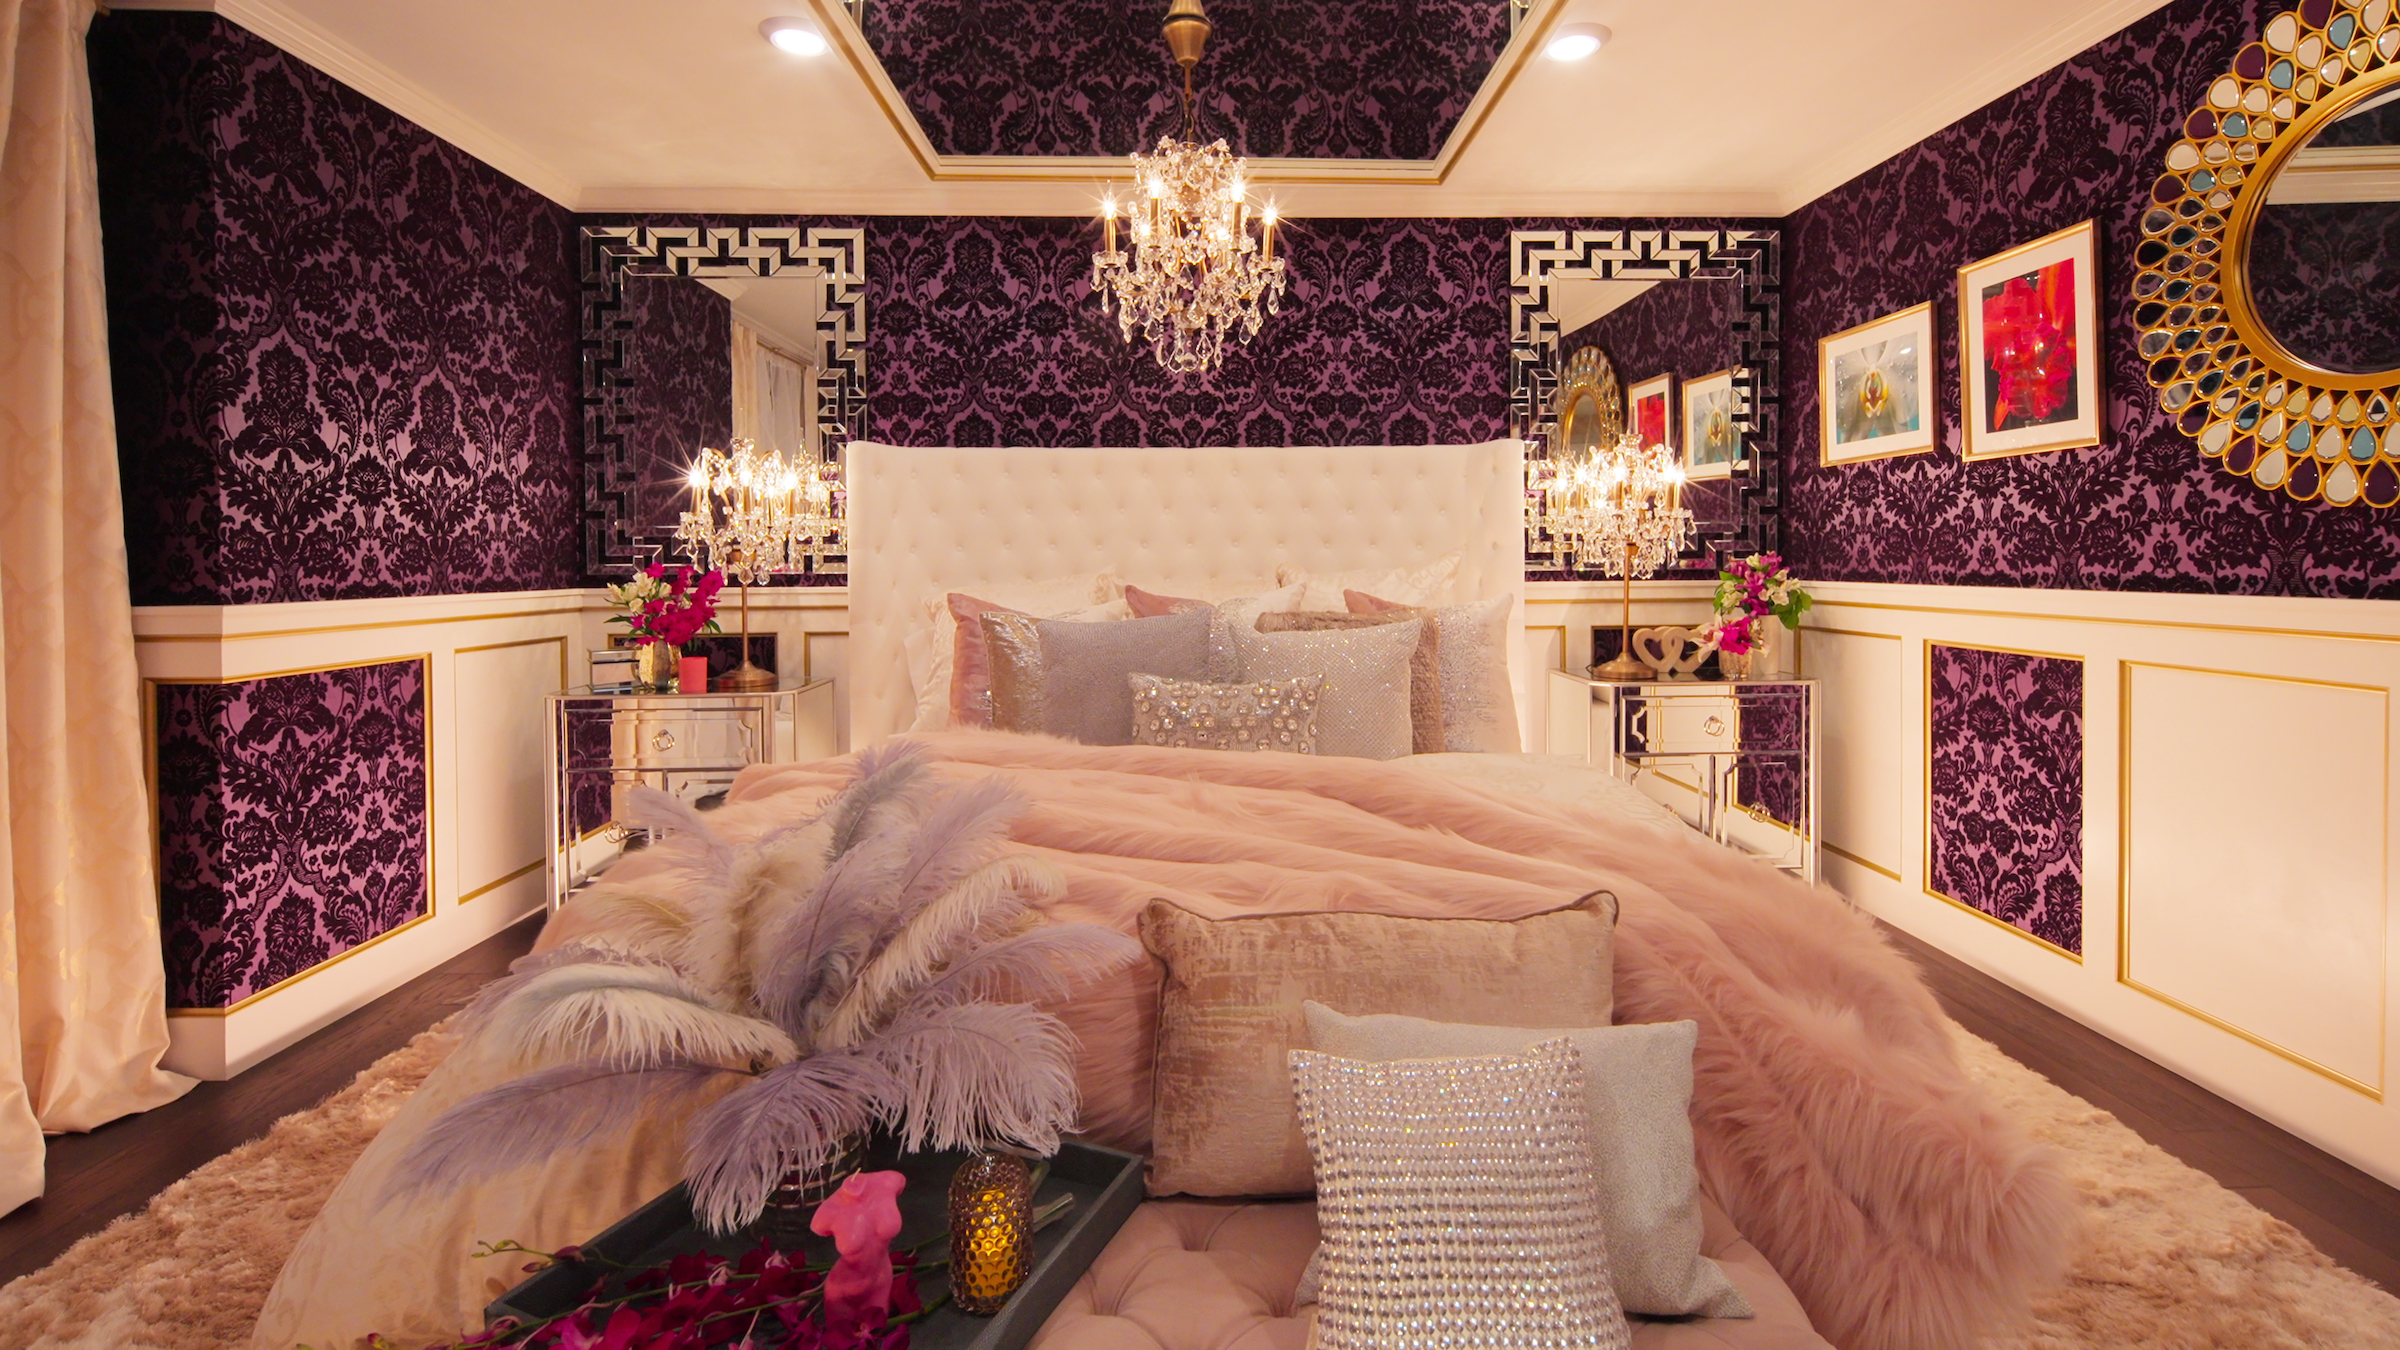 Luxury bed with sensual textiles